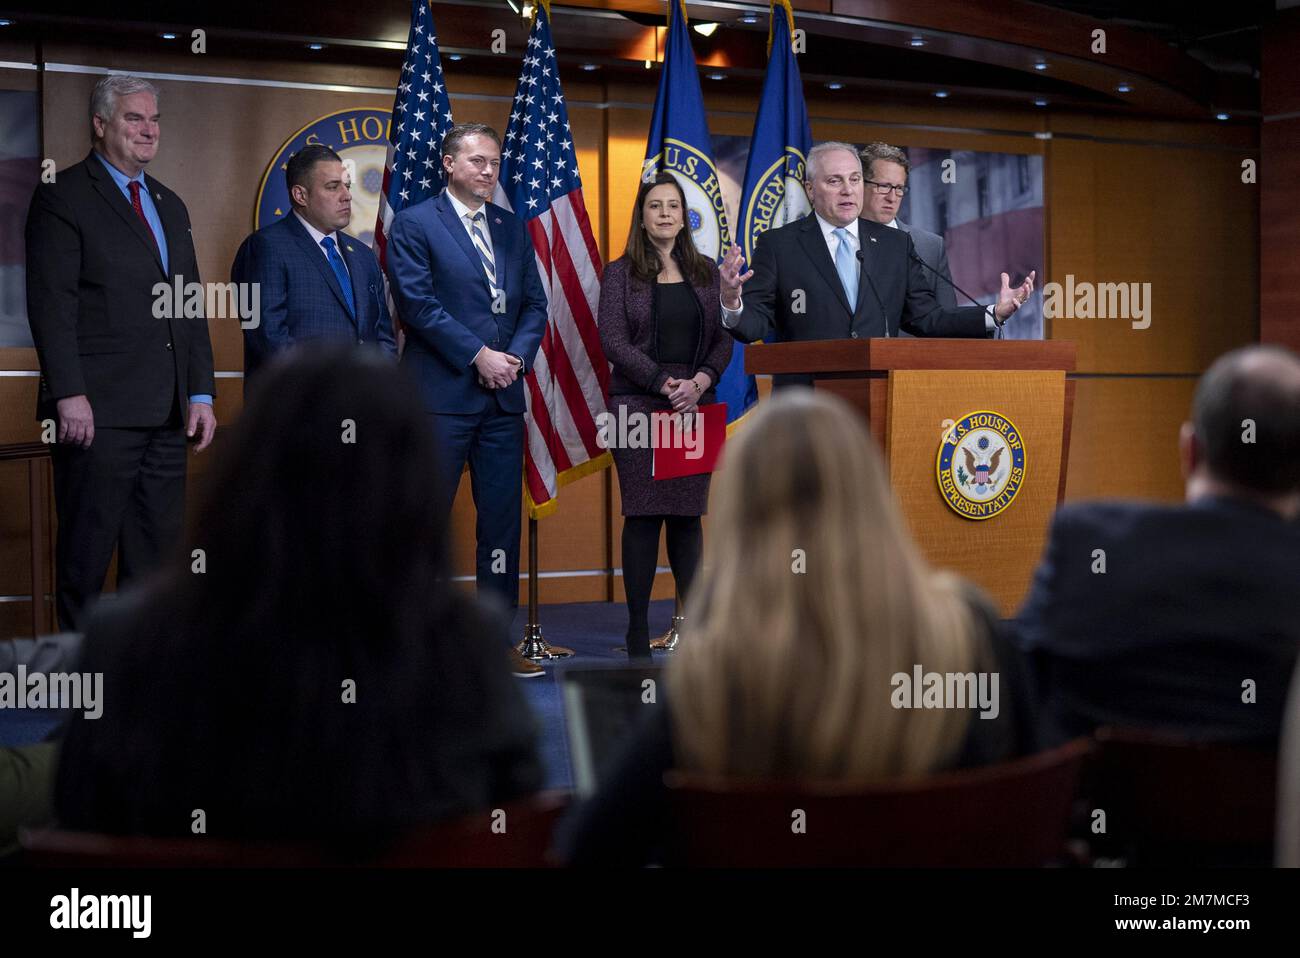 Washington, United States. 10th Jan, 2023. U.S. House Minority Whip Steve Scalise R-LA, along with U.S. Rep. Tom Emmer, R-MN, Rep. Anthony D'Esposito R-NY, Rep. Michael Cloud, R-TX, Republican Conference Chairman U.S. Rep. Elise Stefanik R-NY, and Rep. Adrian Smith R-NE, speaks at a press conference on Capitol Hill in Washington, DC on Tuesday, January 10, 2023. Photo by Ken Cedeno/UPI Credit: UPI/Alamy Live News Stock Photo